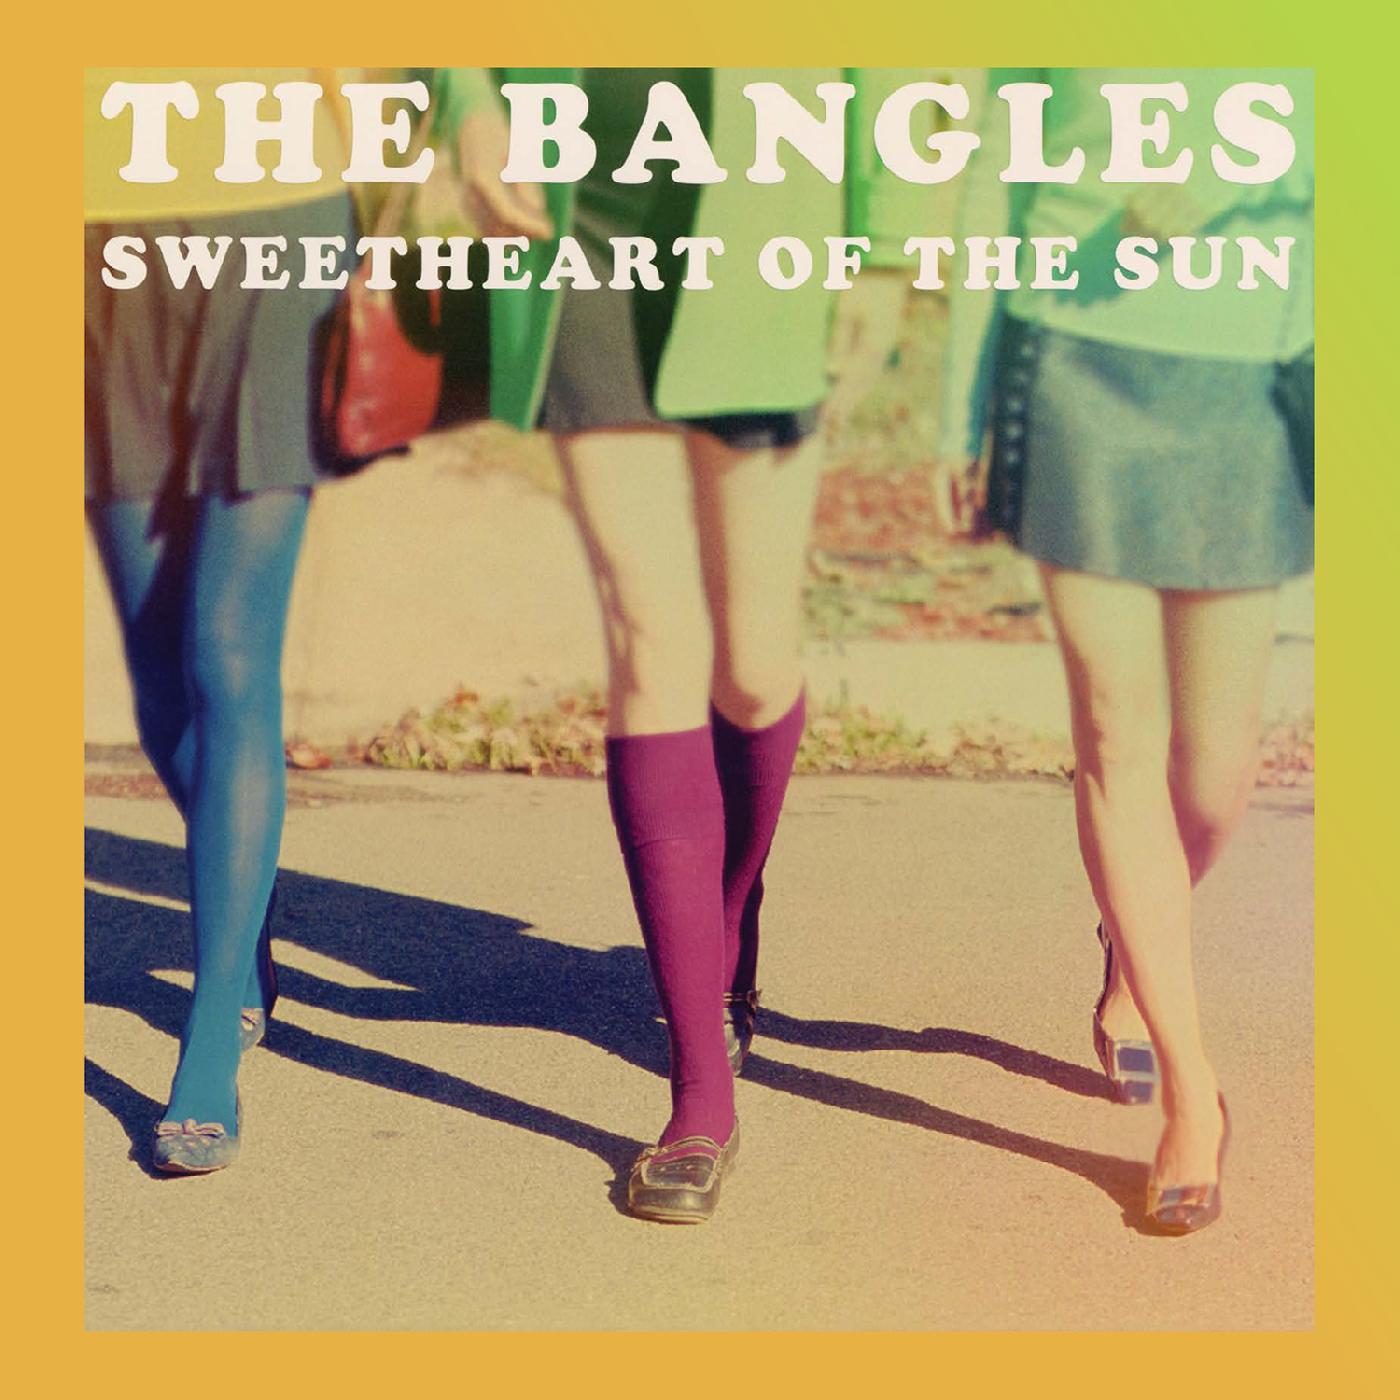 The Bangles | Sweetheart of the Sun (Limited Teal Vinyl Edition) | Vinyl